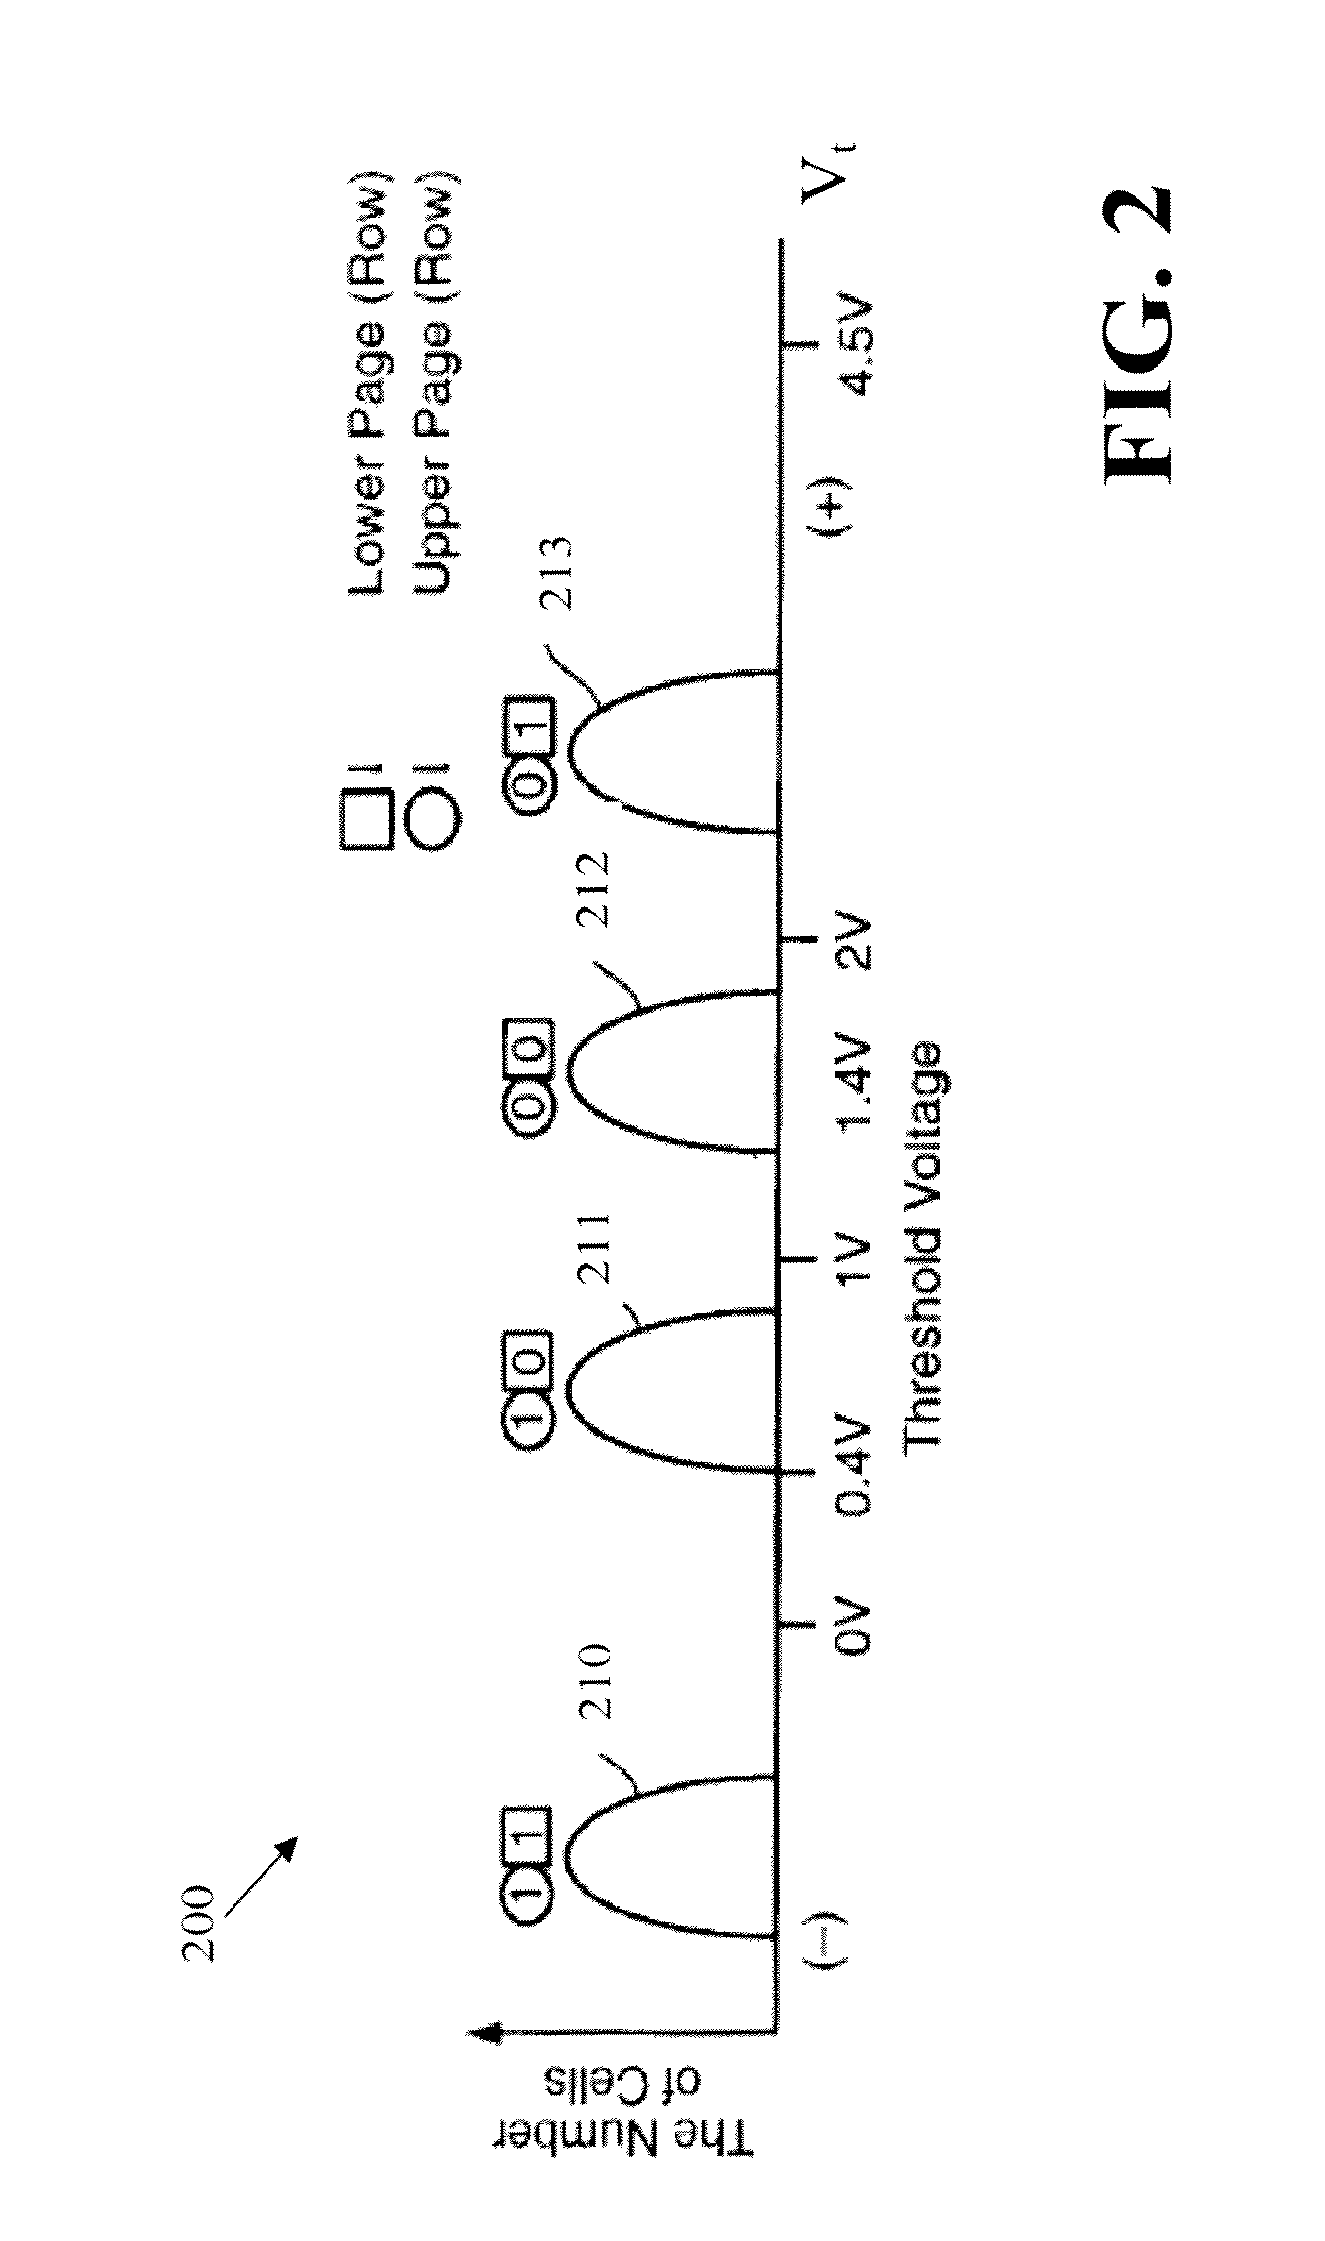 Methods and Apparatus for Soft Data Generation for Memory Devices Based Using Reference Cells